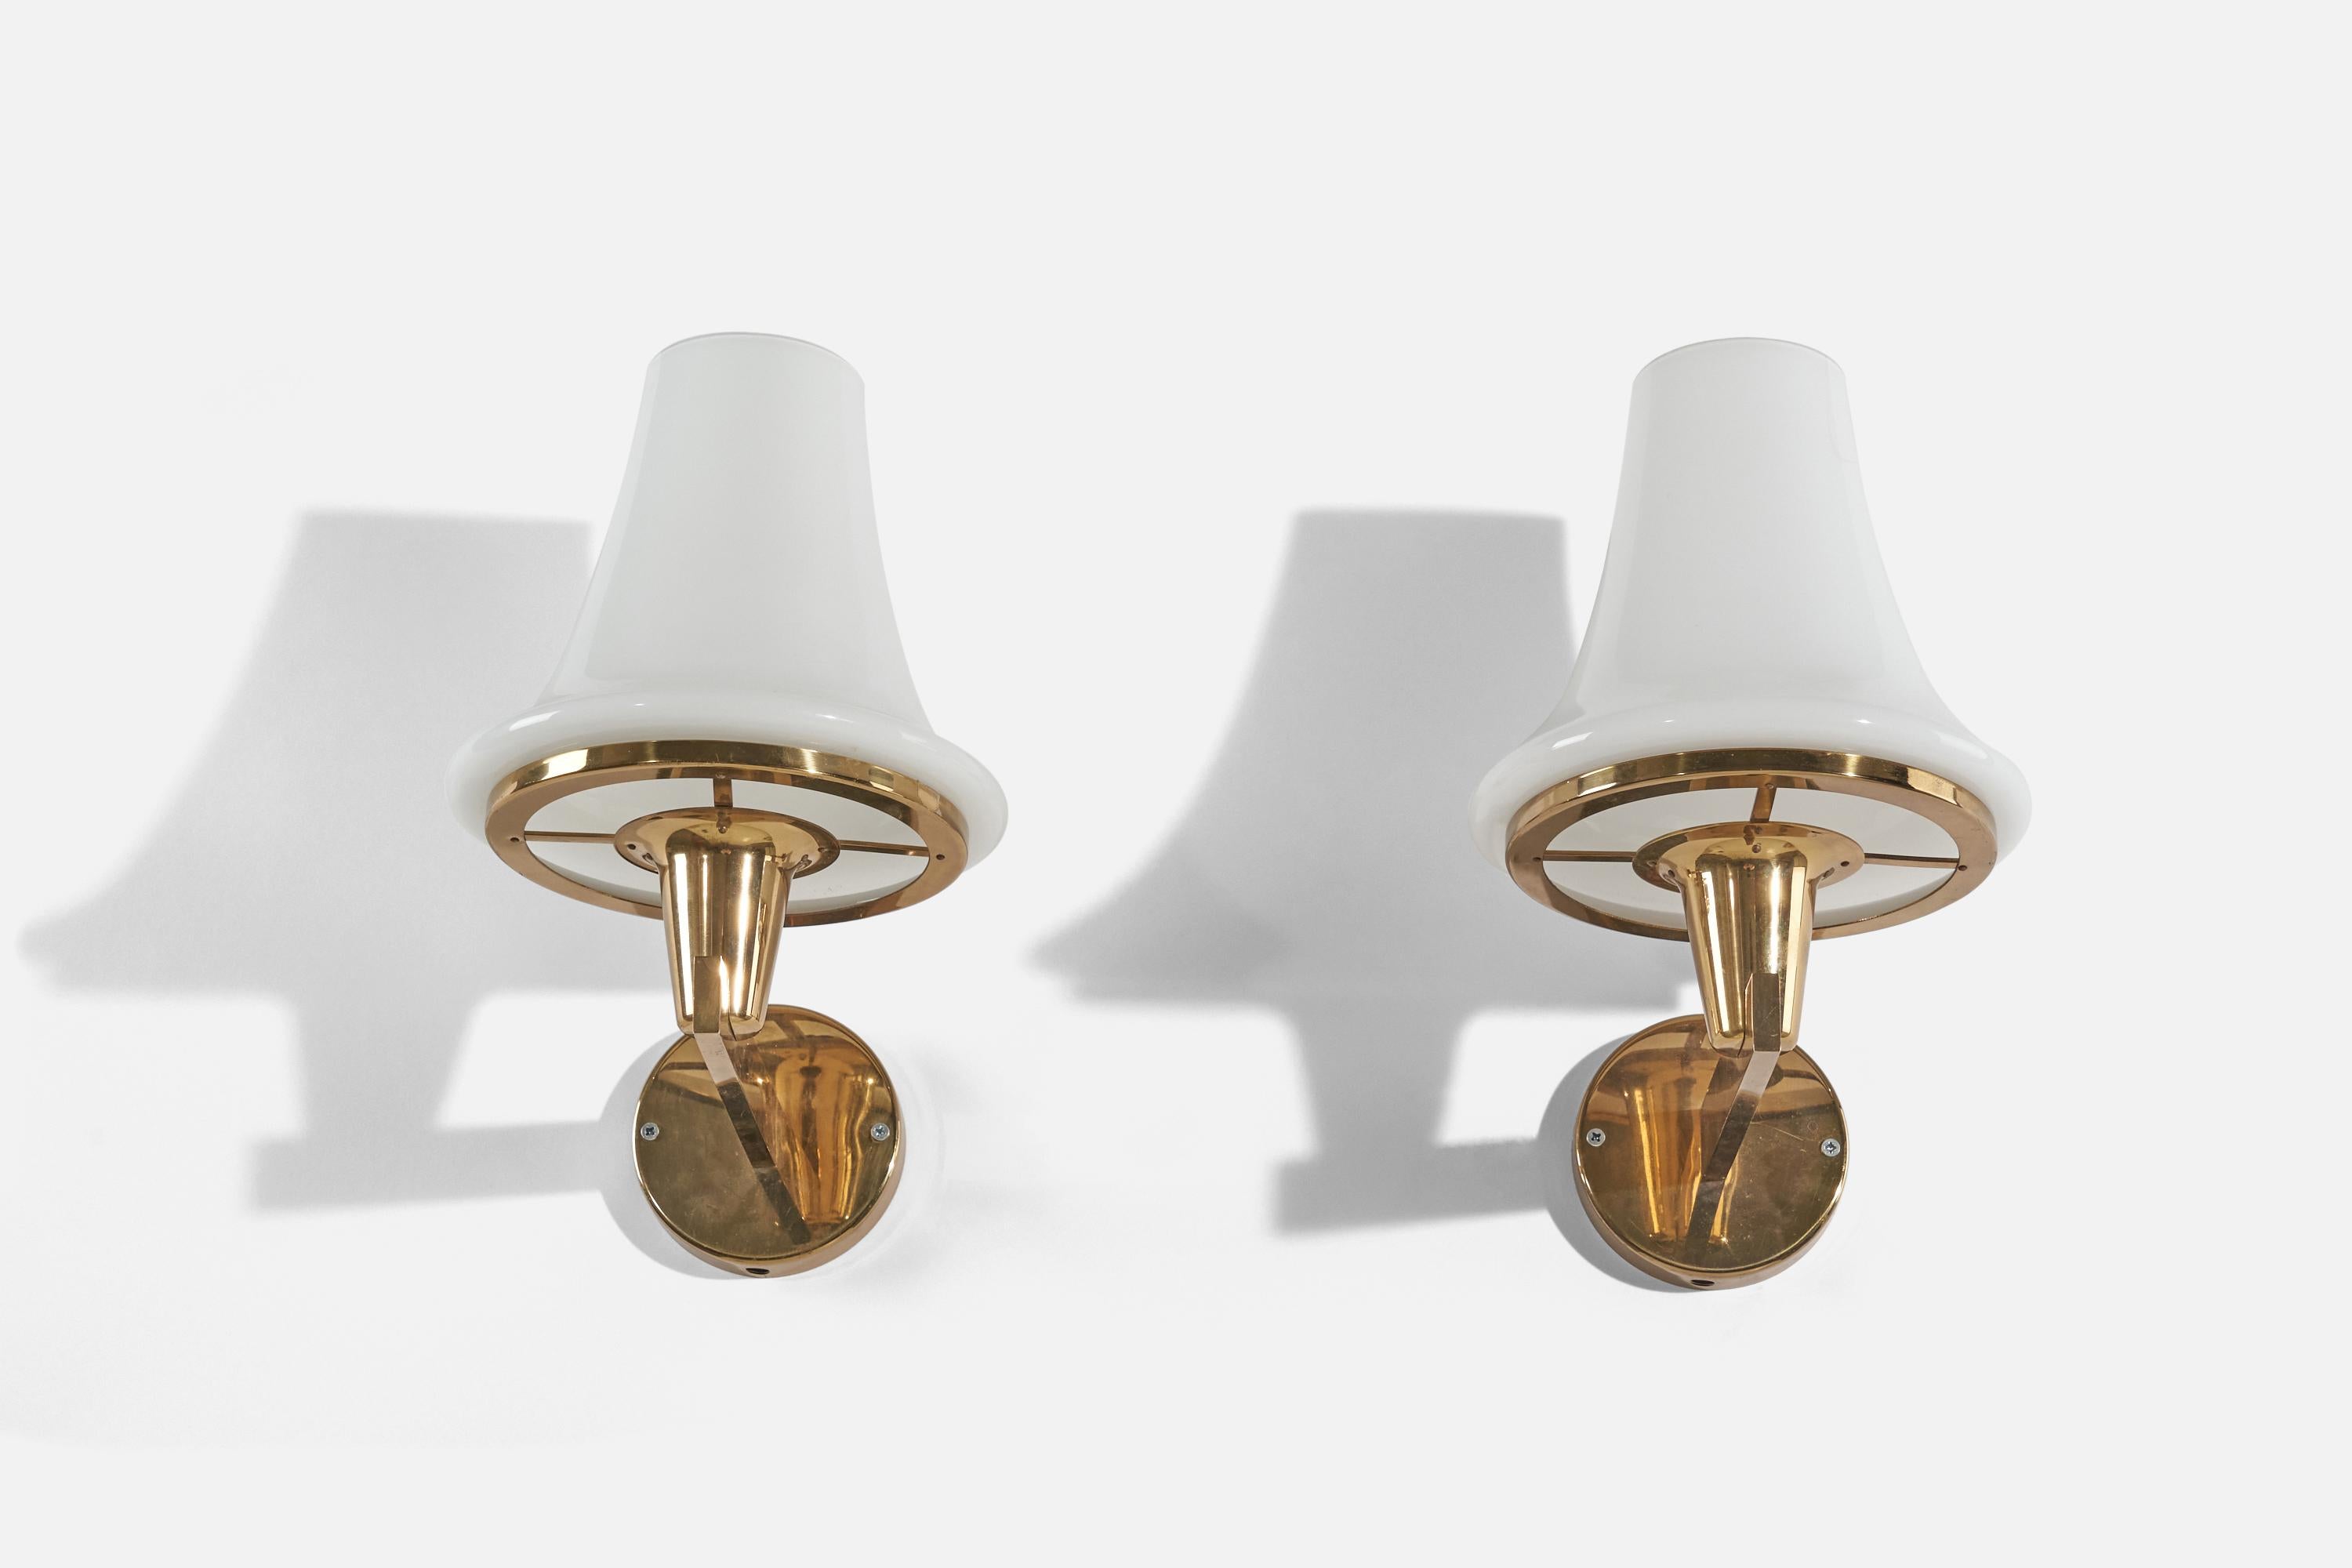 Mid-20th Century Hans-Agne Jakobsson, Pair of Wall Lights, Brass, Milk Glass, Sweden, c. 1960s For Sale